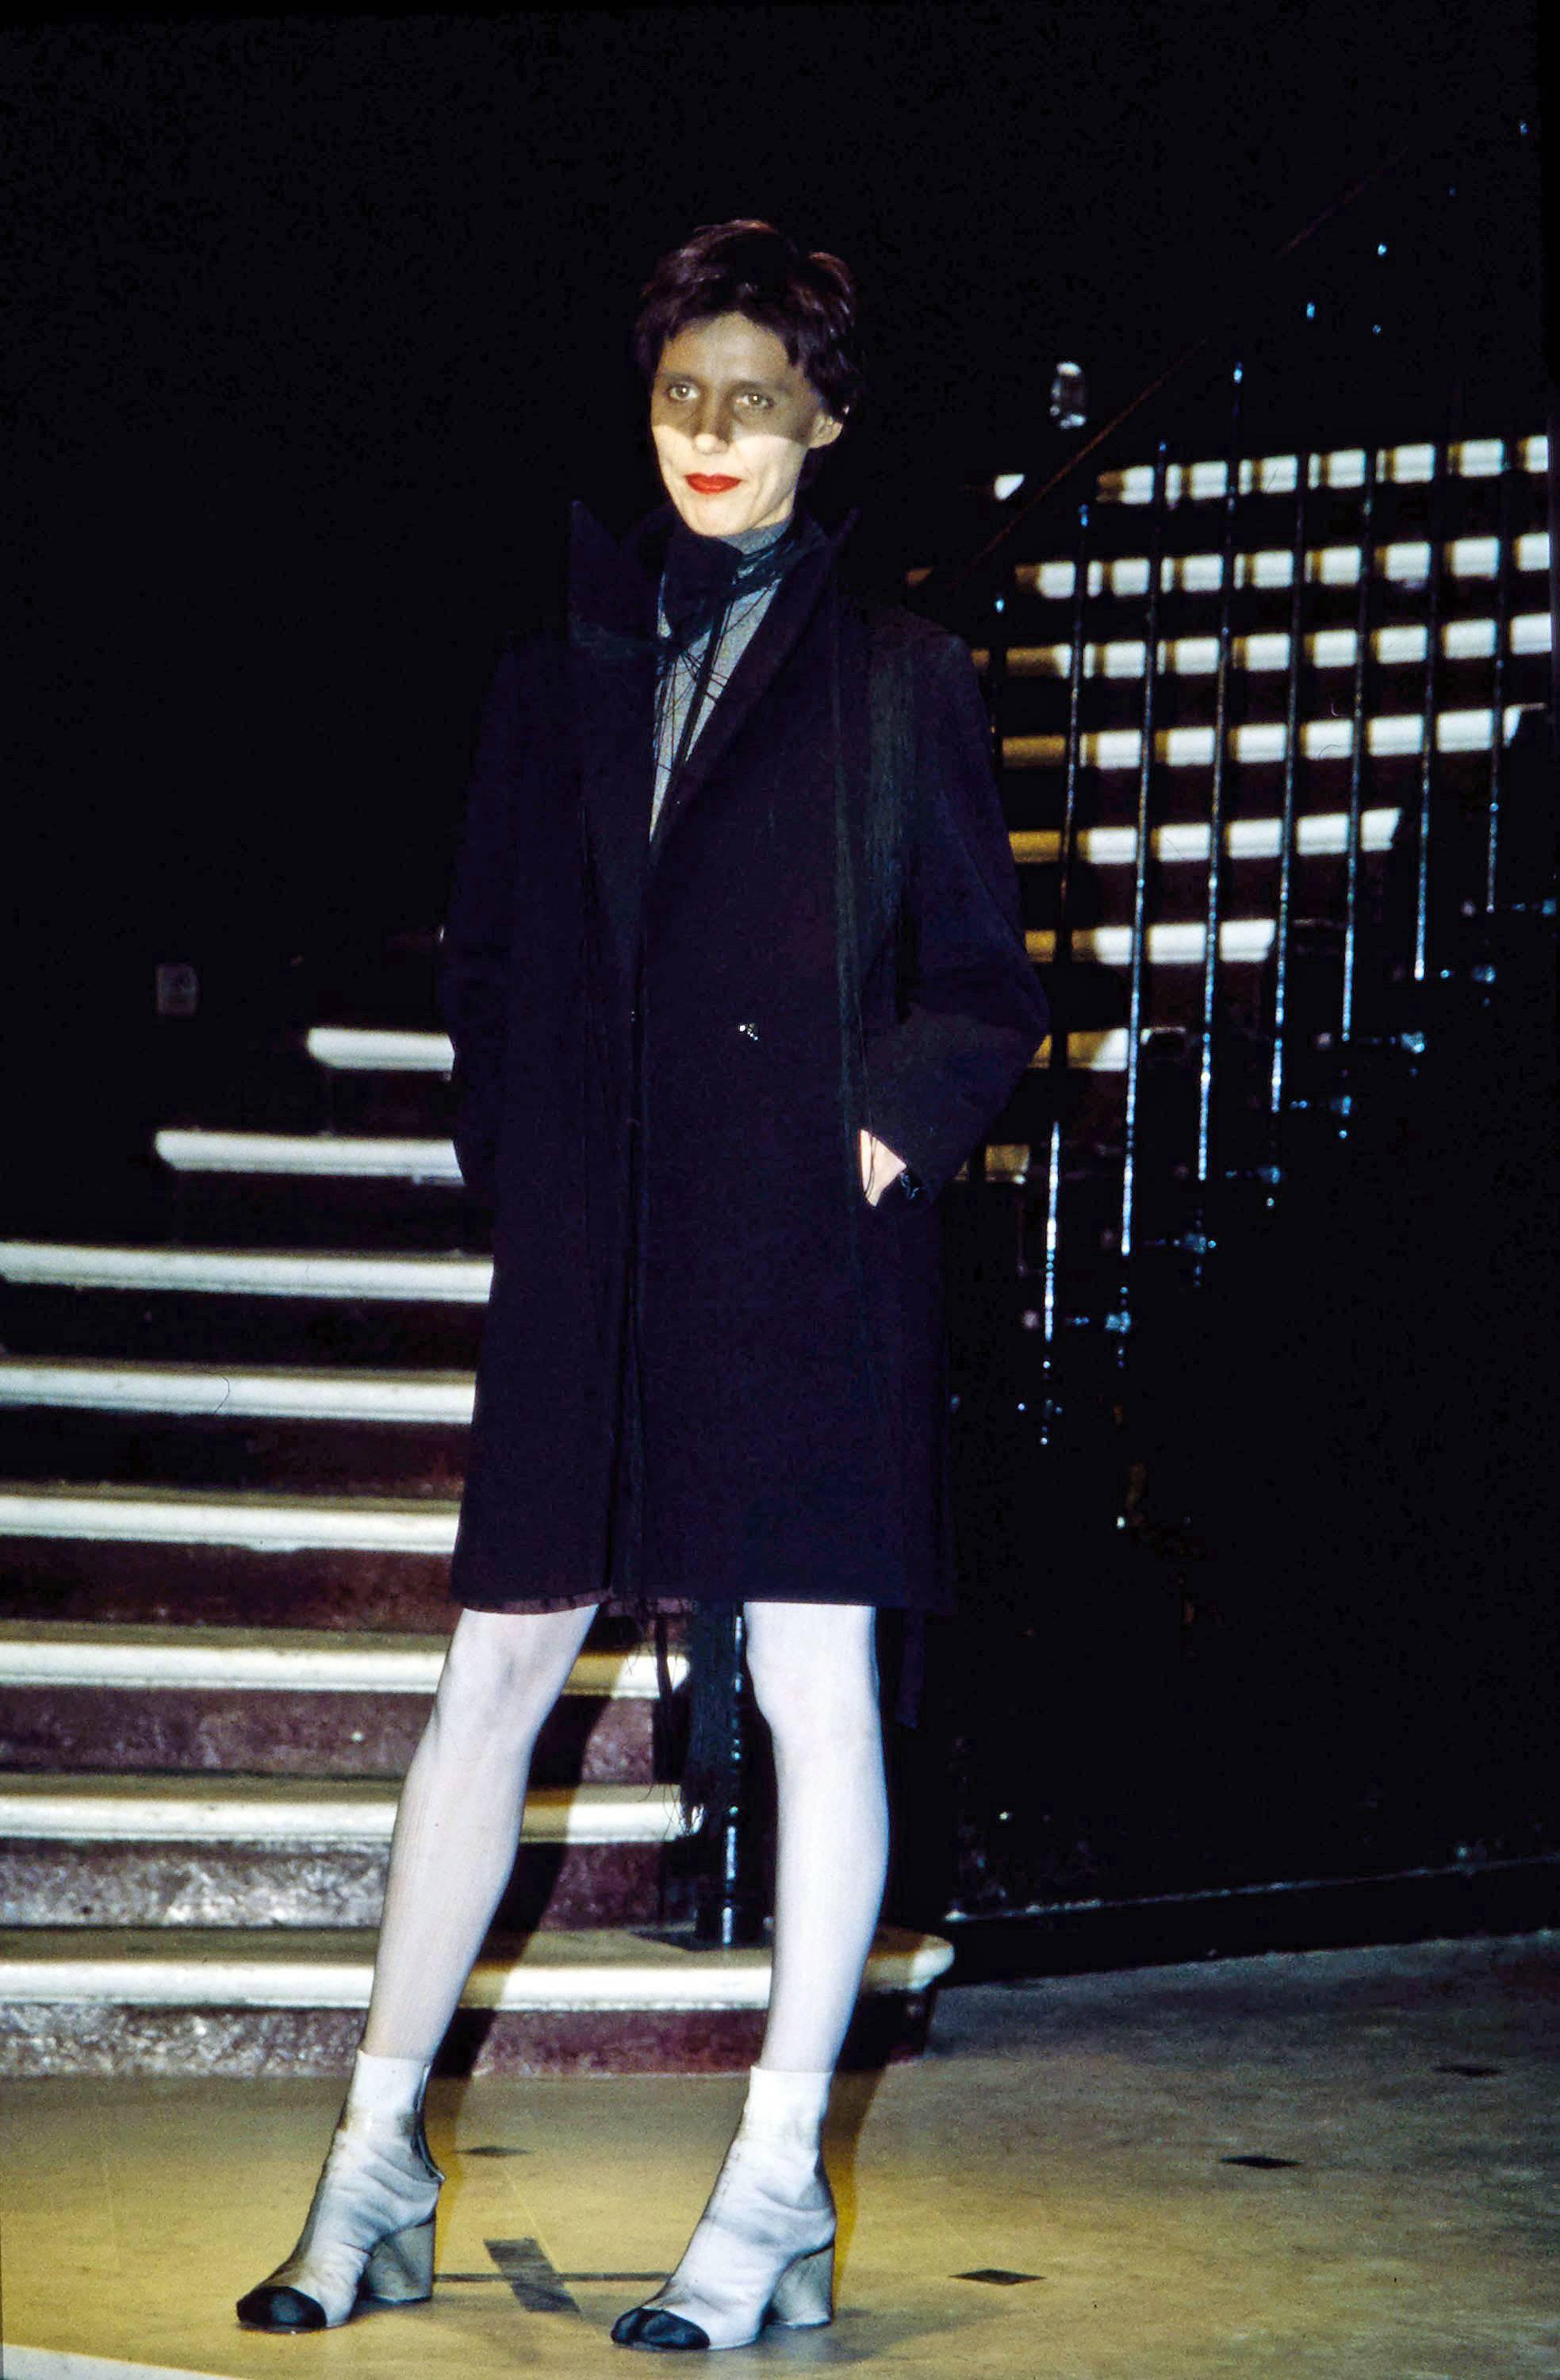 Introducing an iconic Maison Martin Margiela black wool oversized coat from the Autumn-Winter 1996 collection. This coat exemplifies the designer's avant-garde approach to fashion and innovative design.

With its loose fit and exaggerated standing